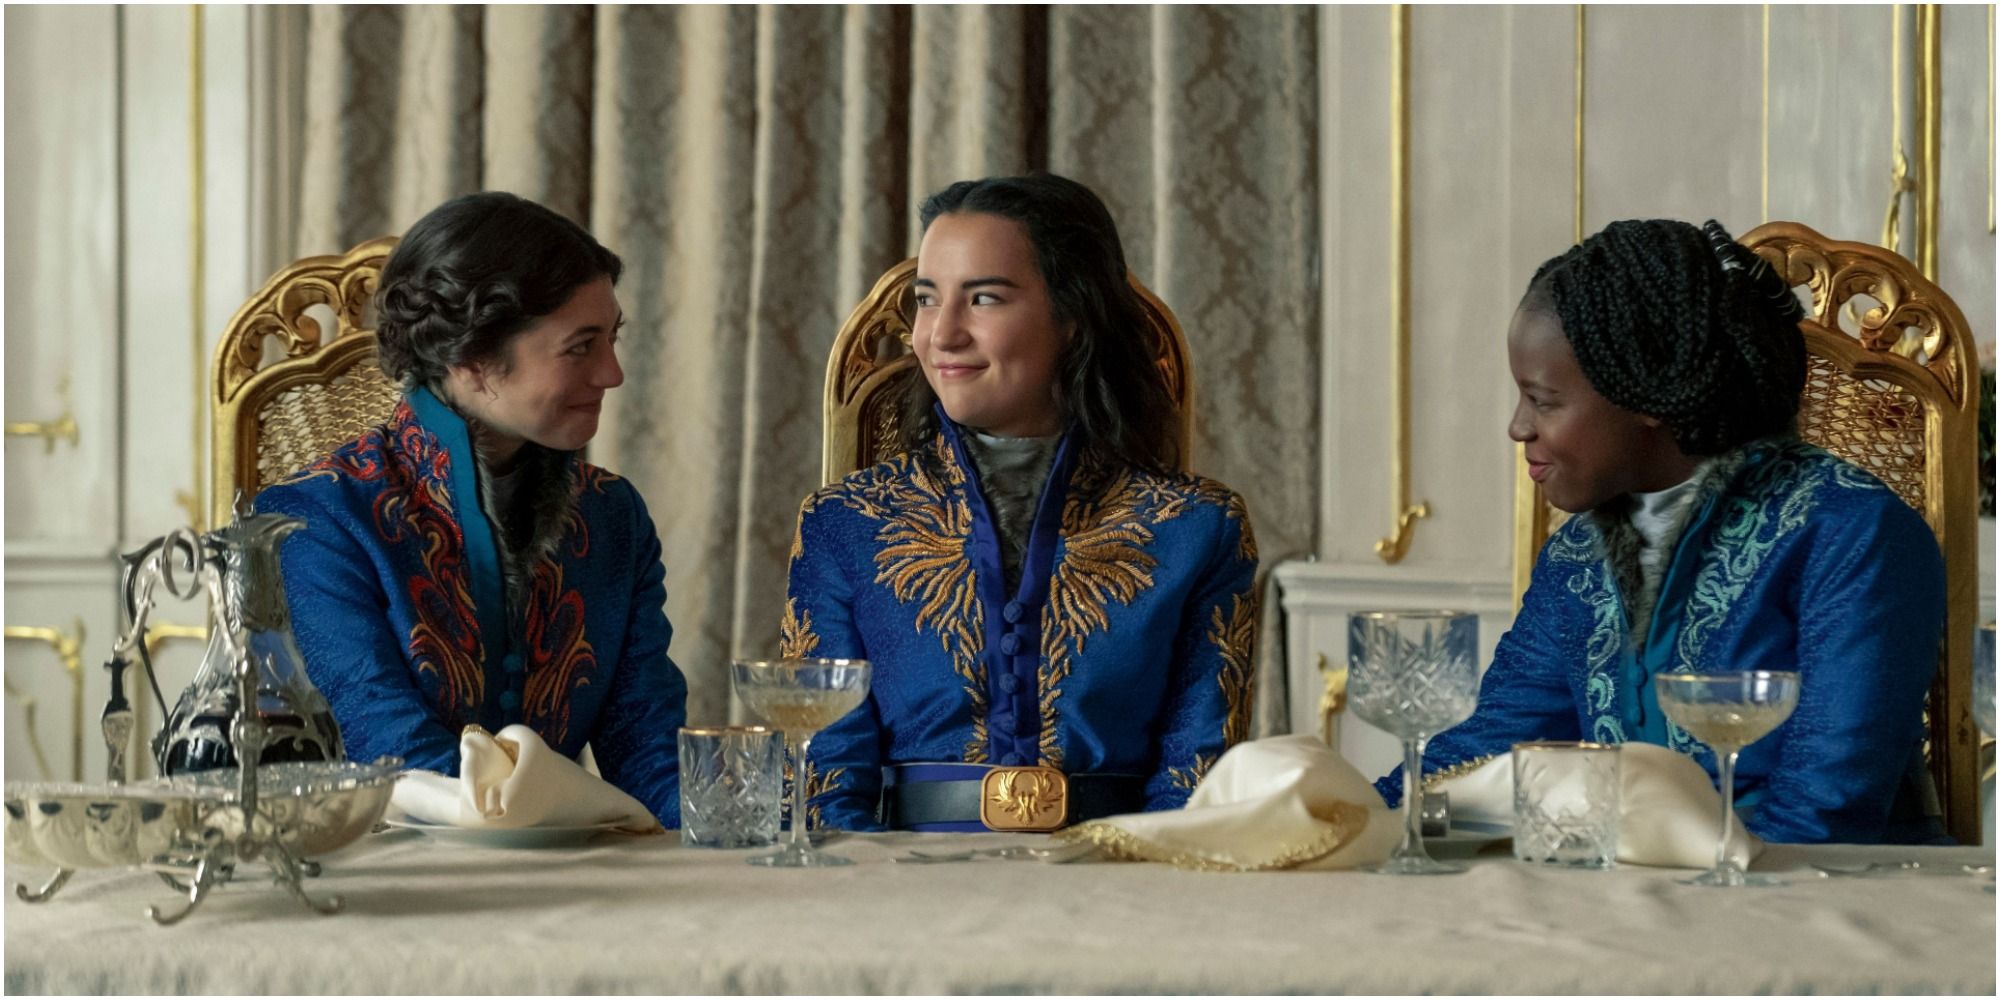 Alina and two other Grisha sit at a table